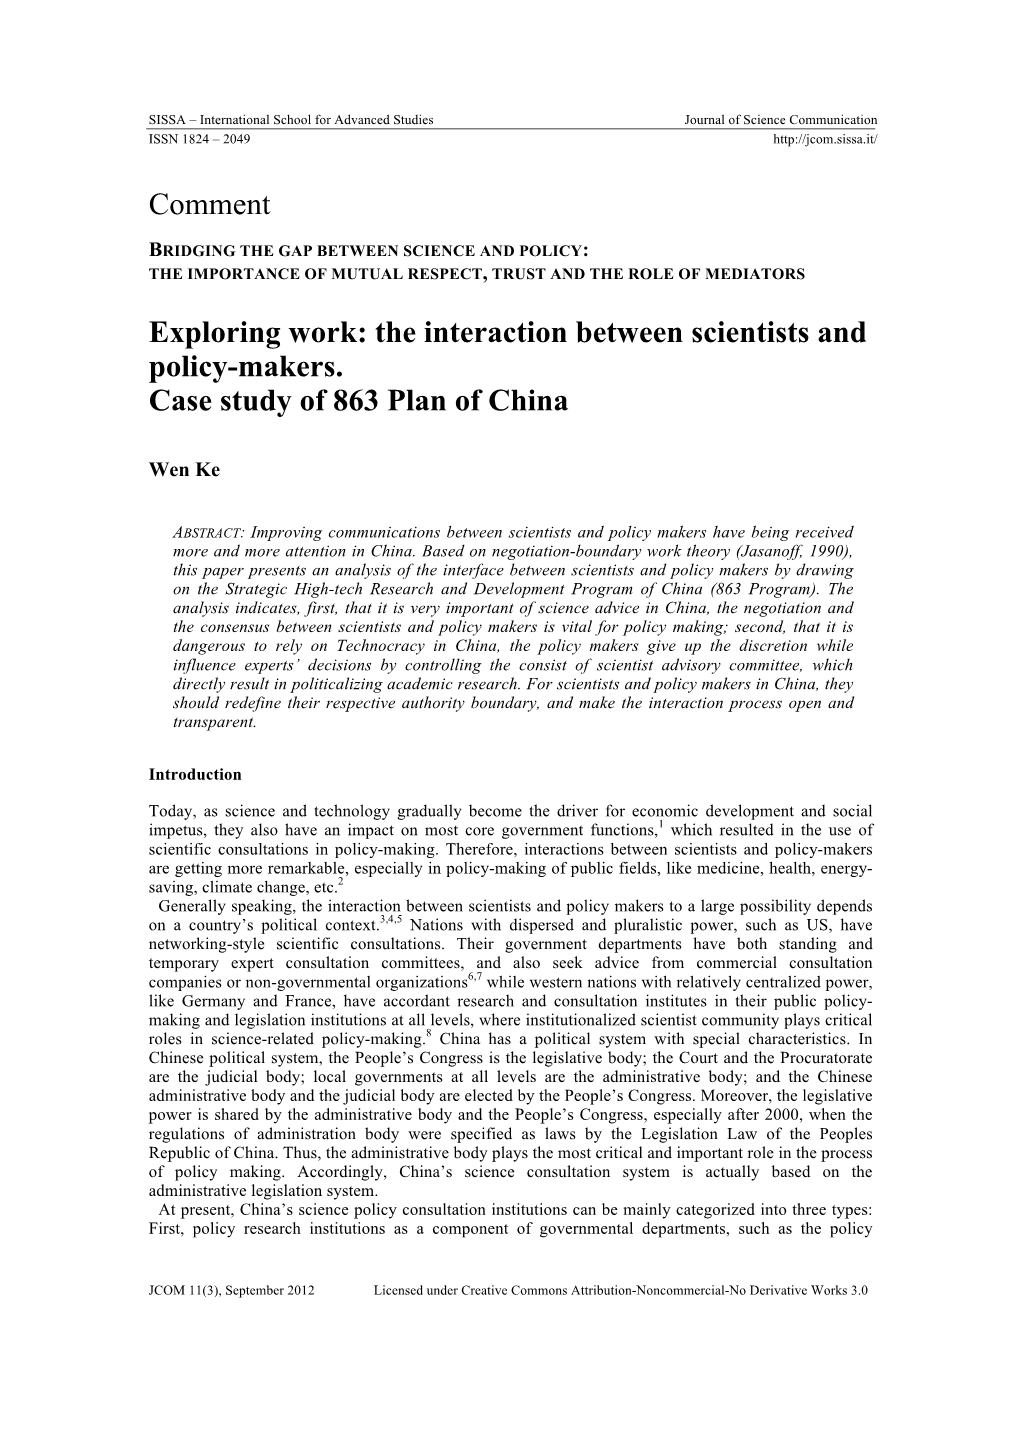 The Interaction Between Scientists and Policy-Makers. Case Study of 863 Plan of China